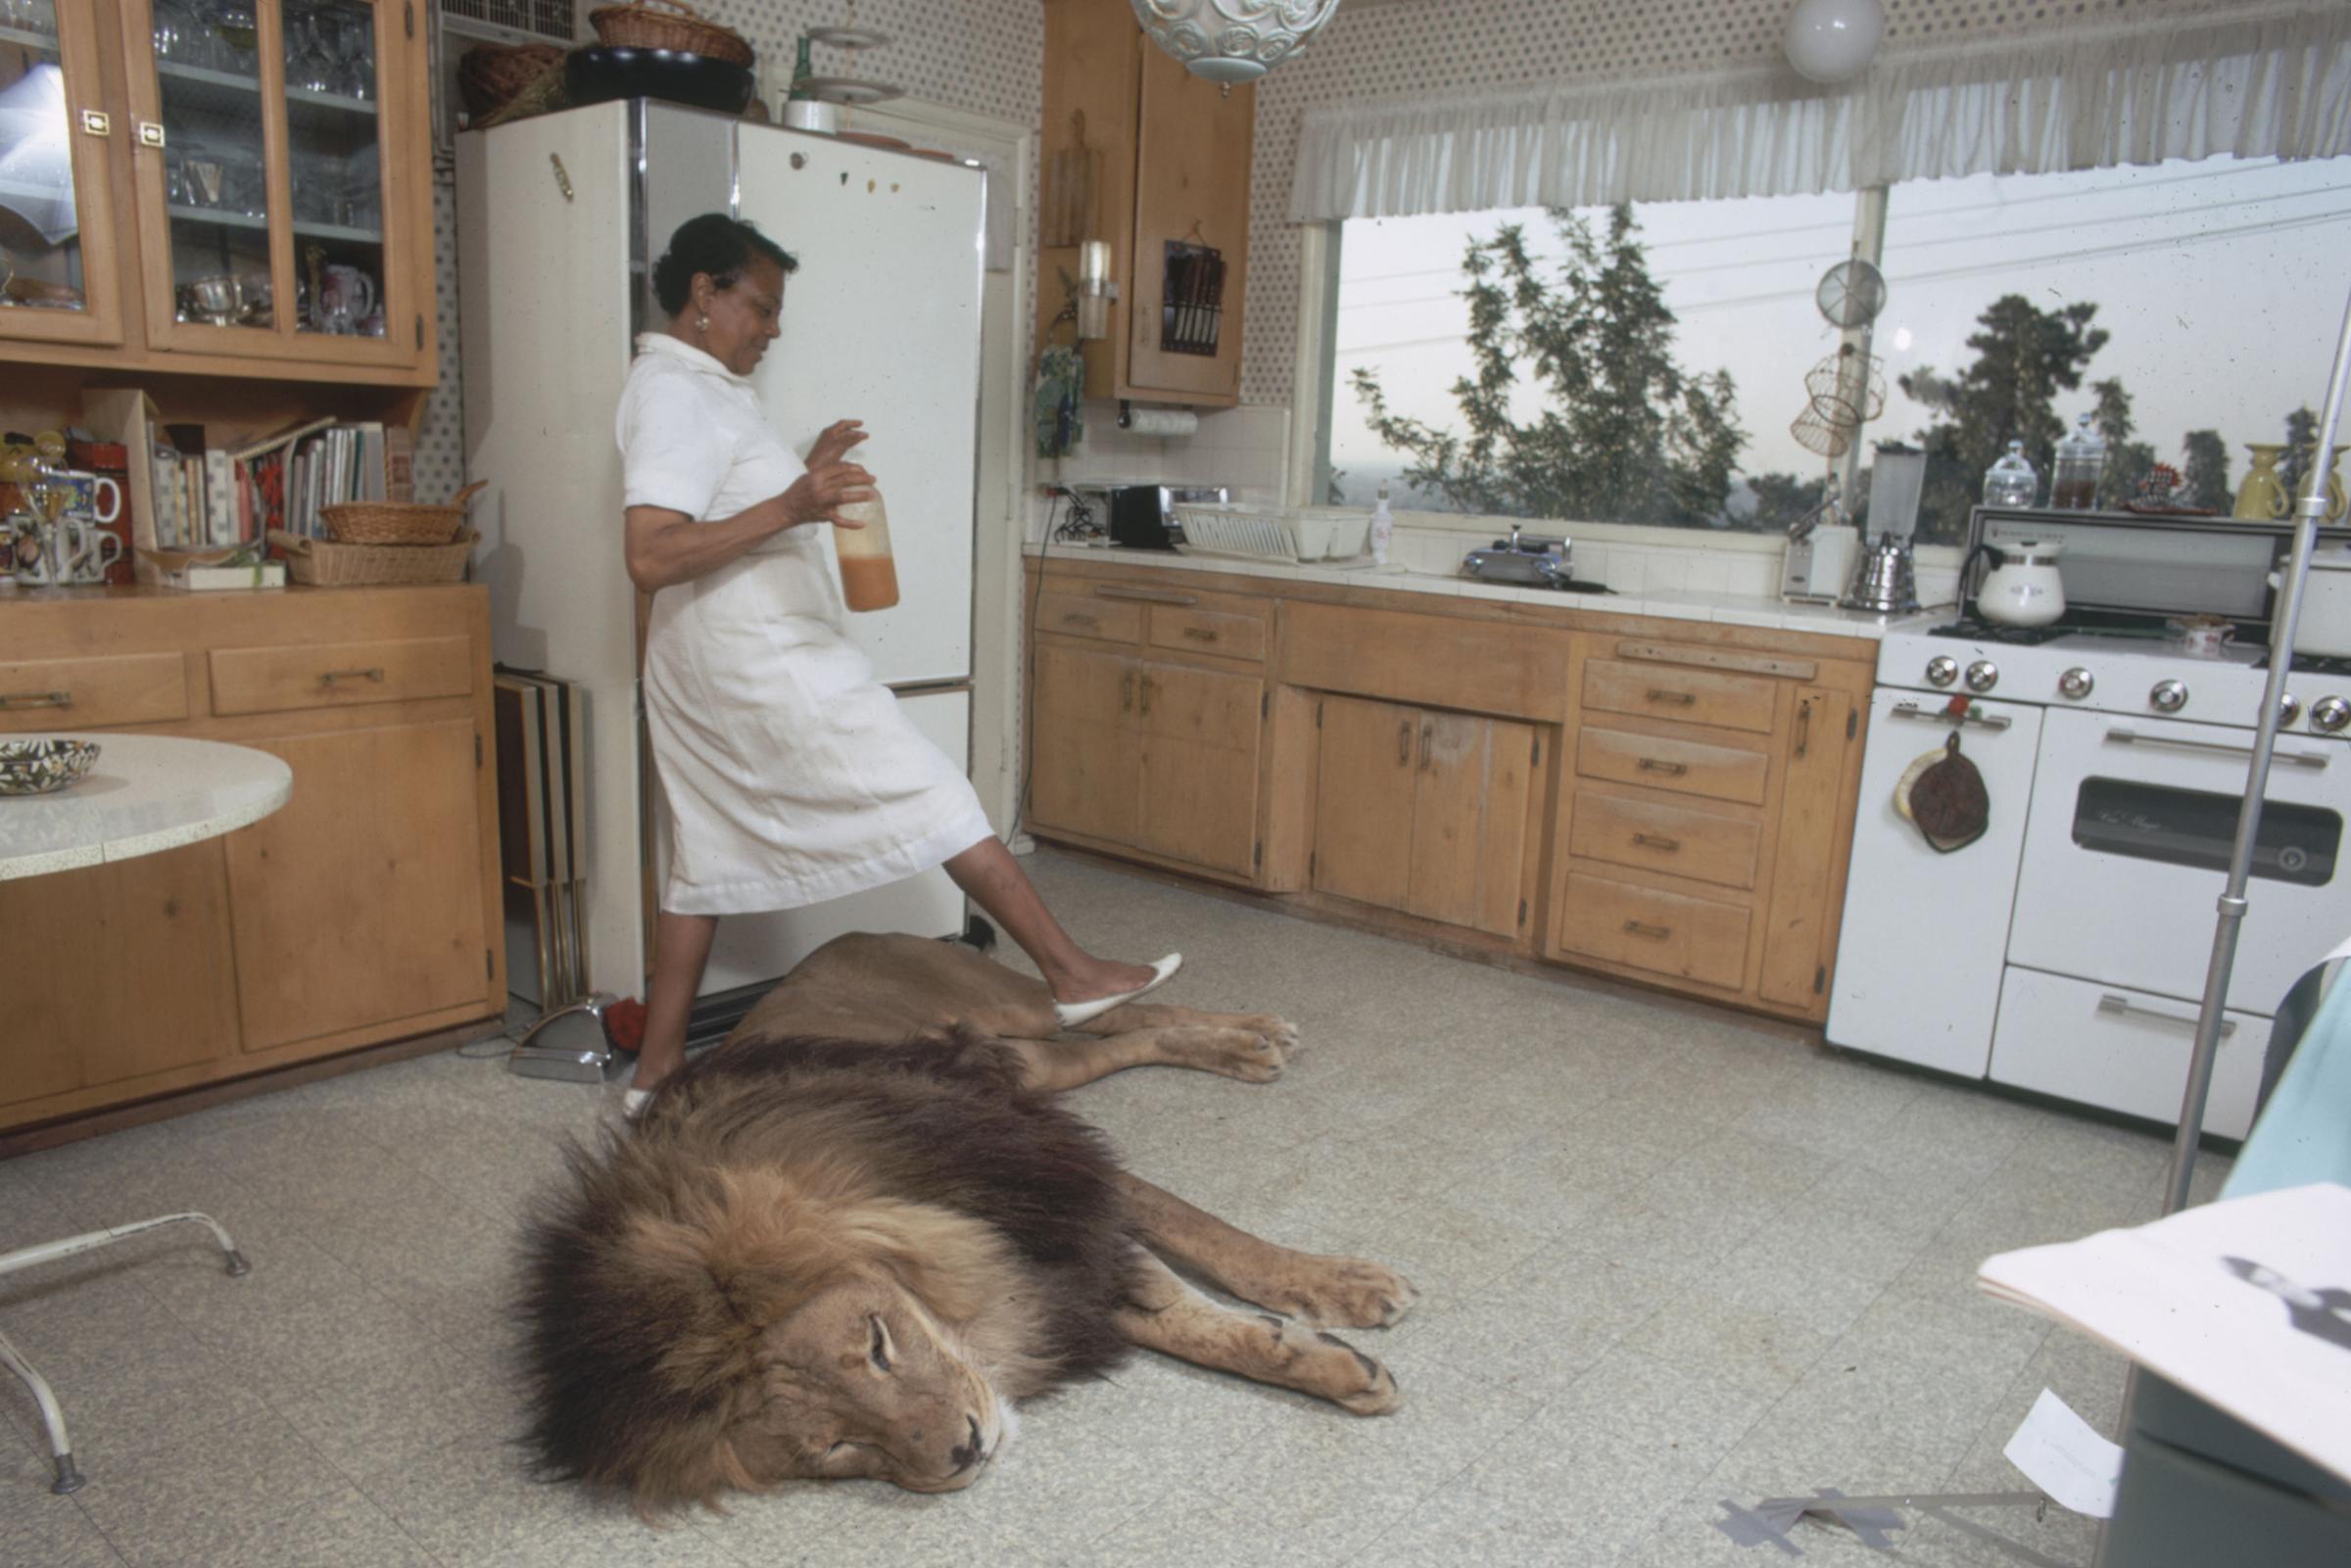 A cleaning woman steps over Neil the lion in the home of Tippi Hedren and Noel Marshall, 1971.